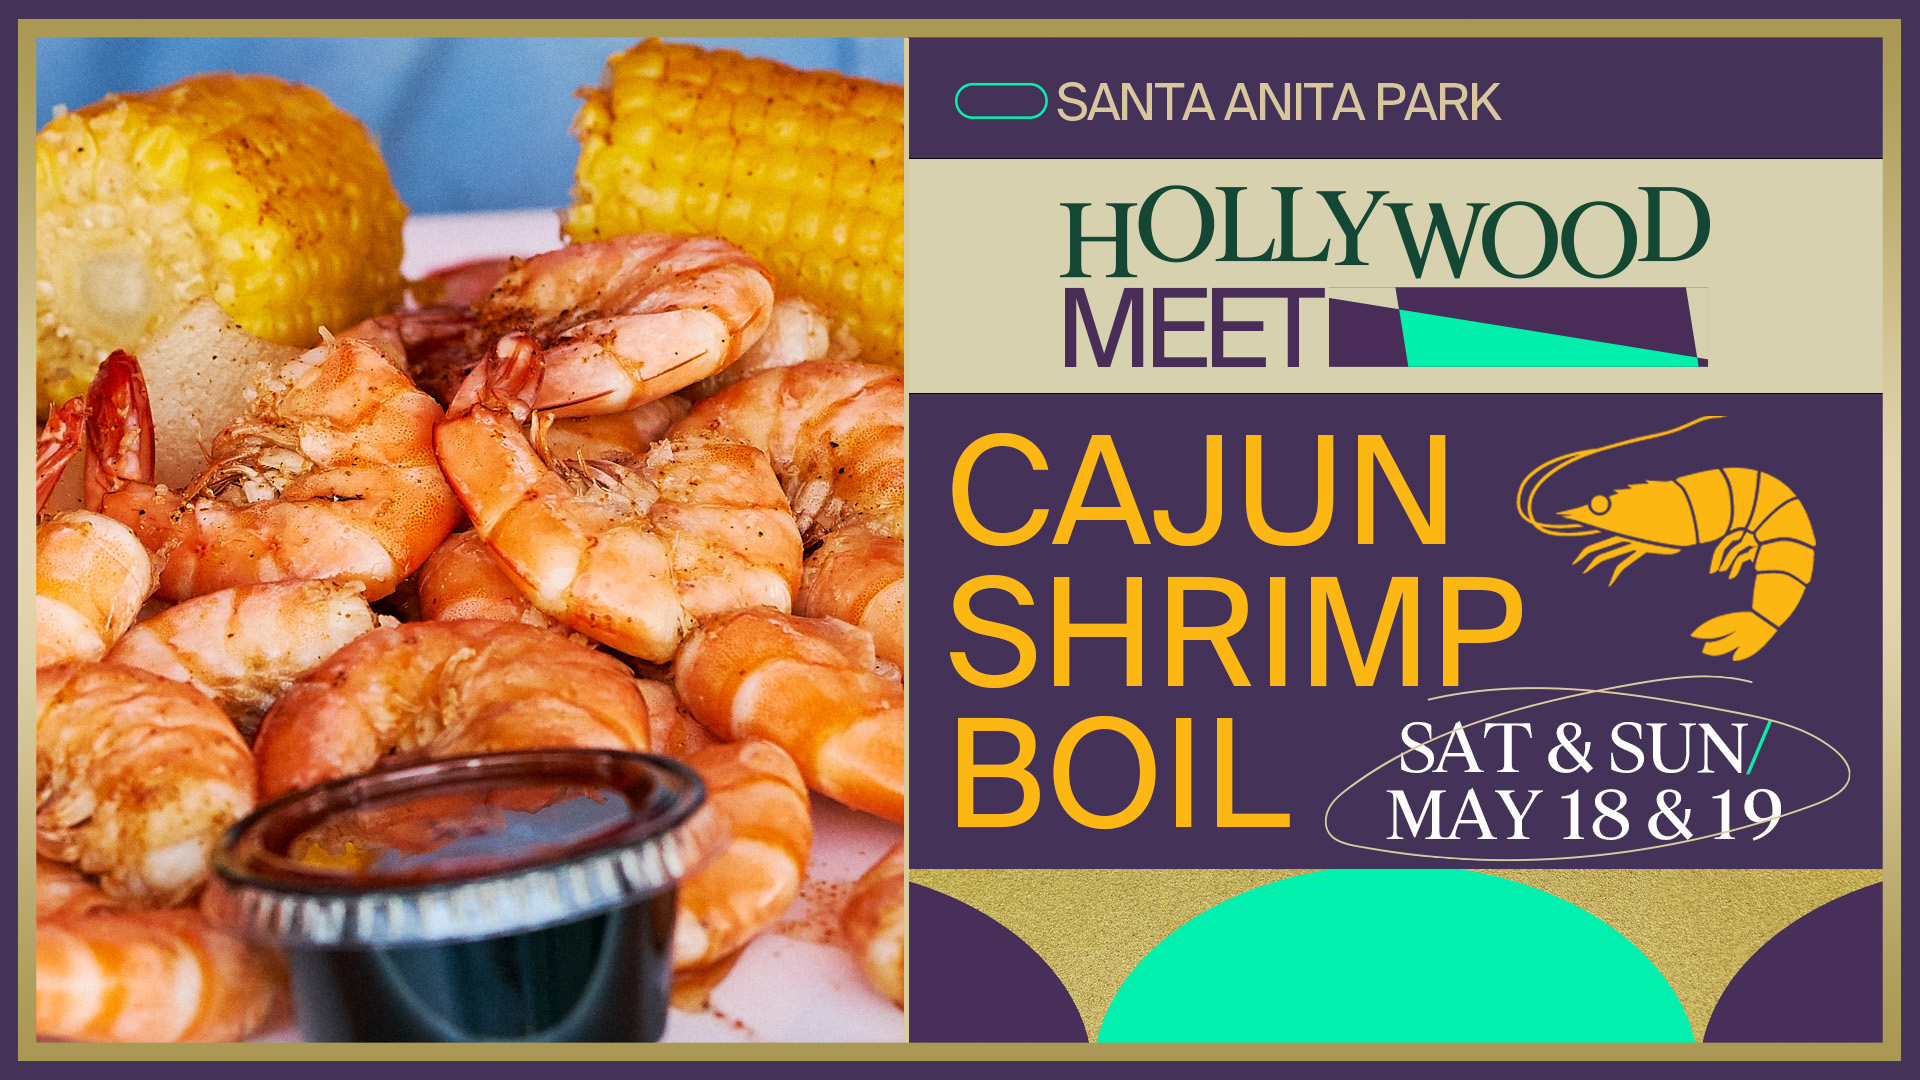 DON'T MISS OUT ON THE CAJUN SHRIMP BOIL ON SAT & SUN, MAY 18 & 19!